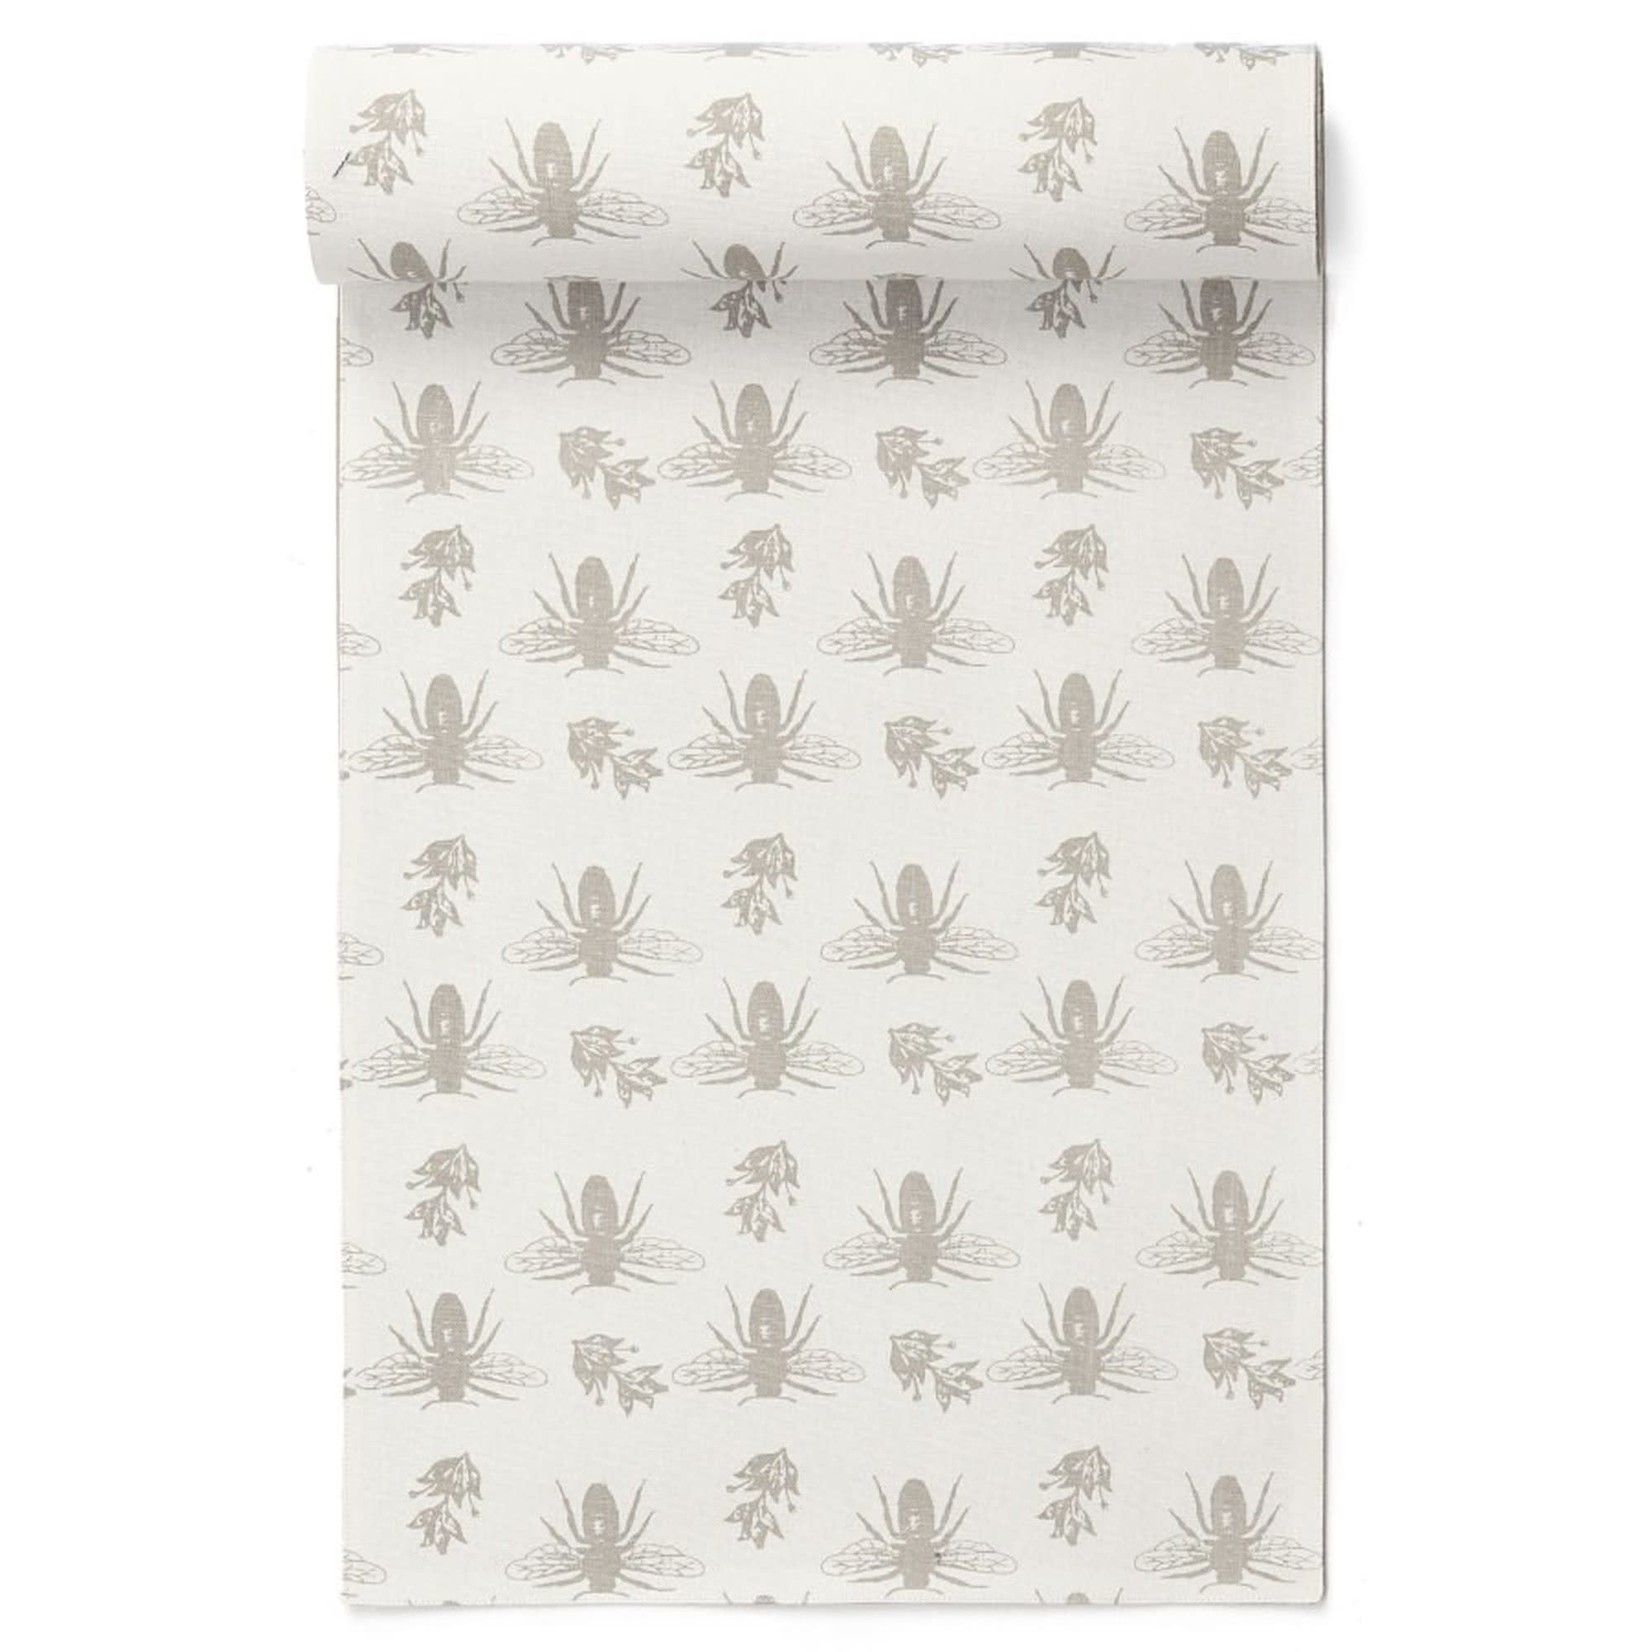 Table Runner - Grey Bees